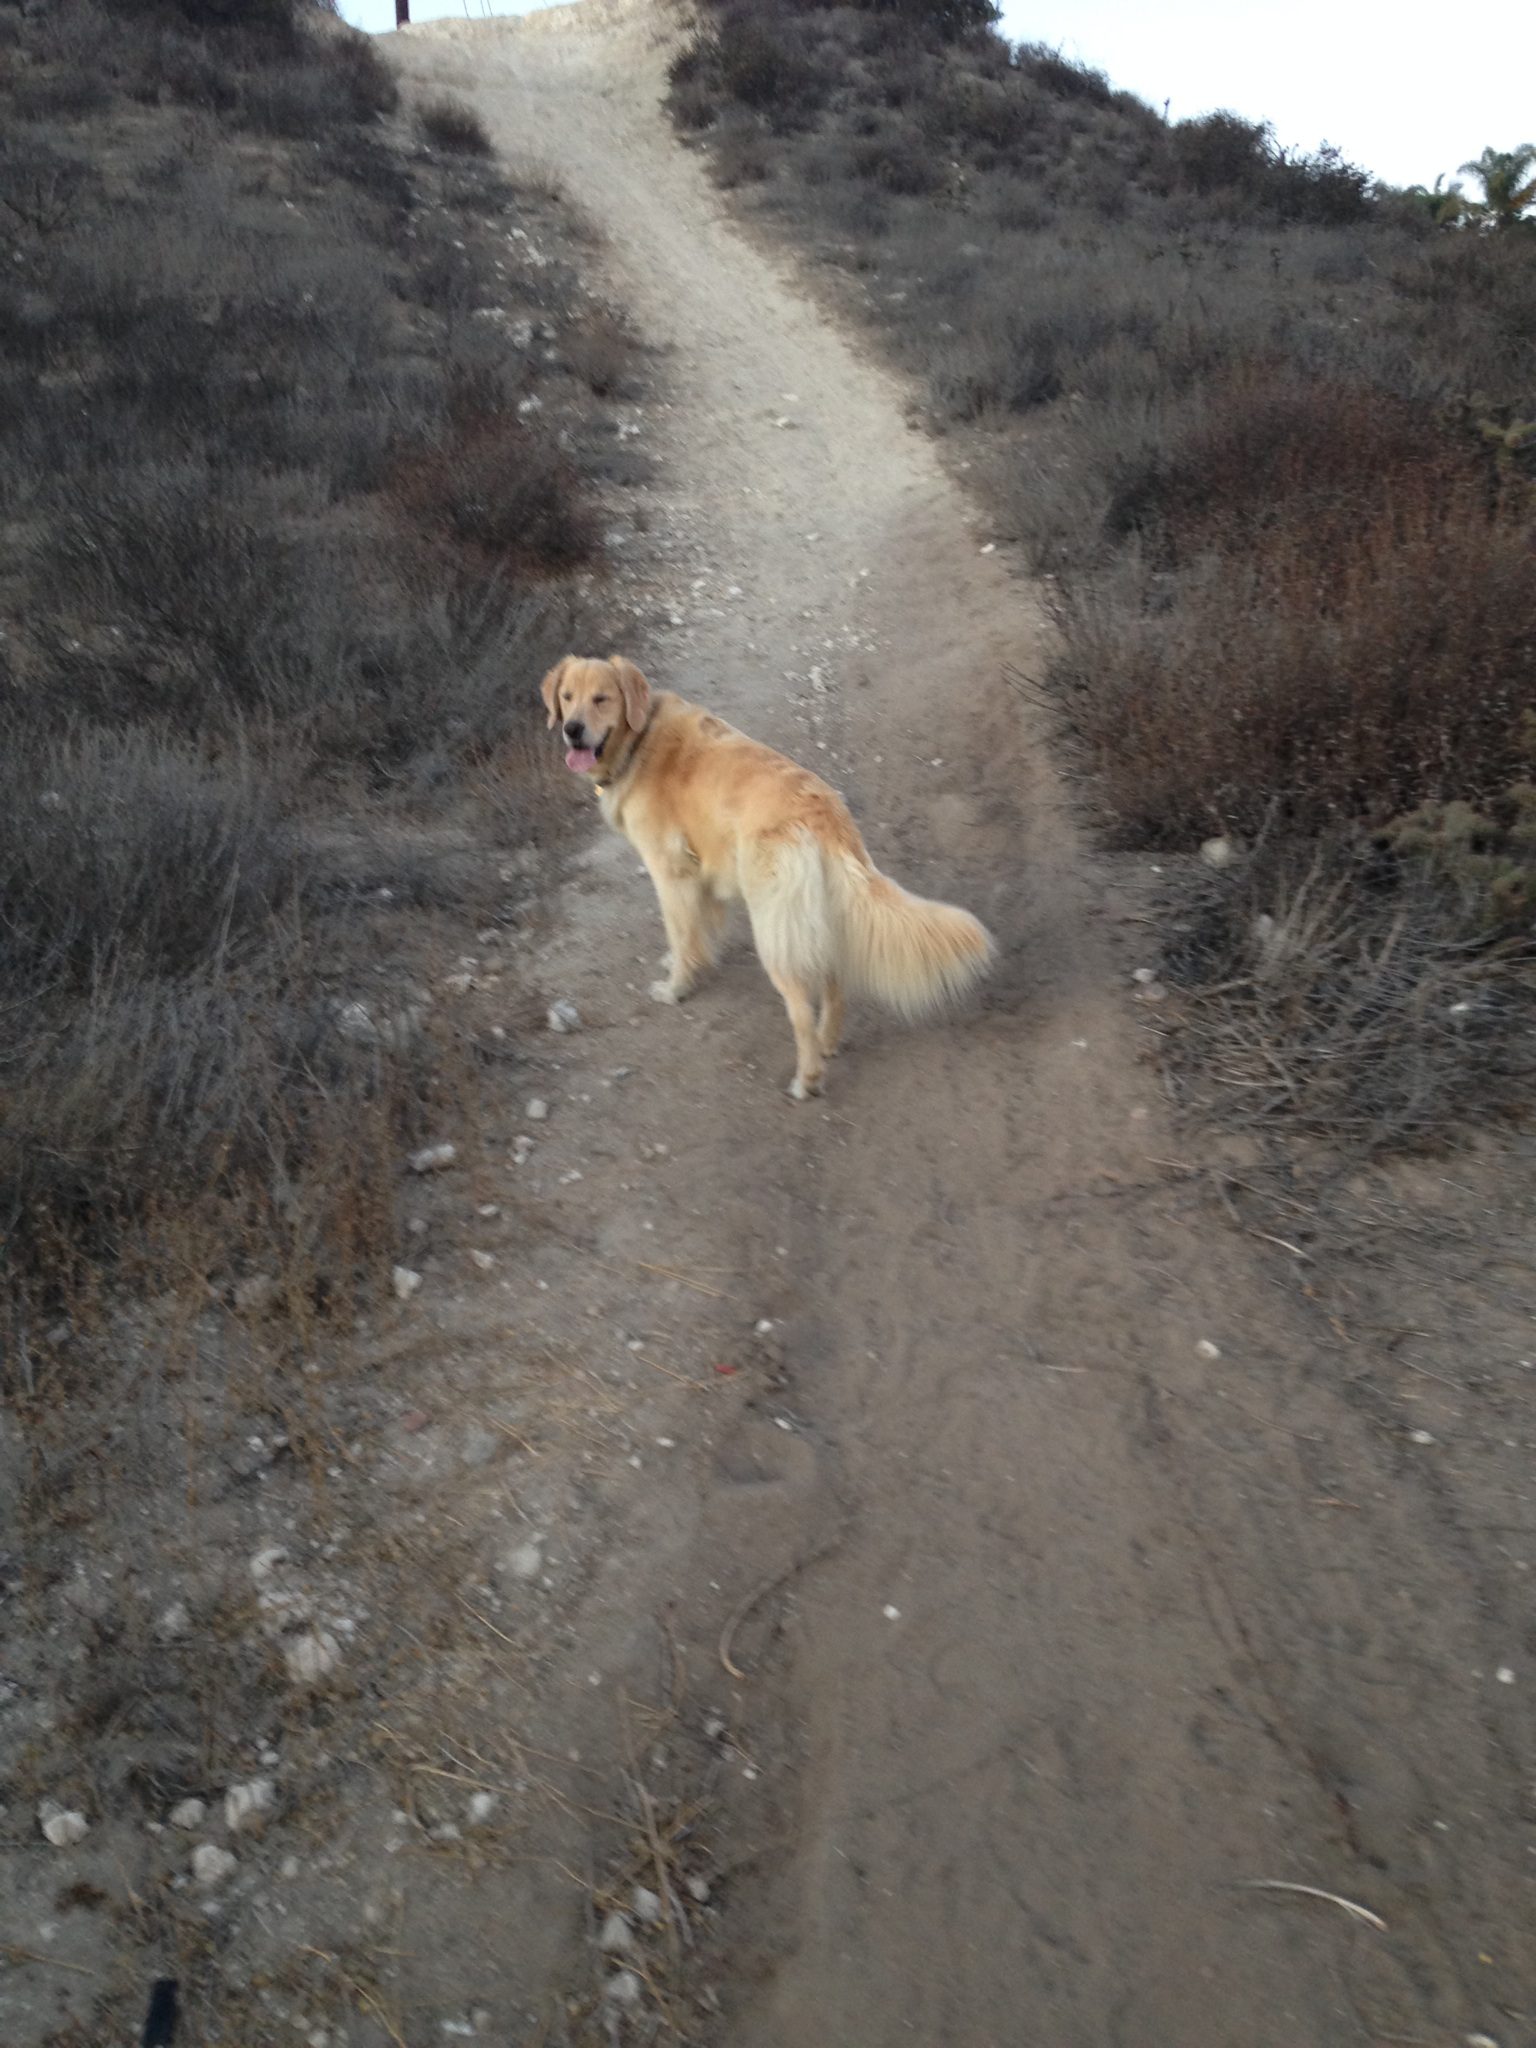 Canyons are great places  for humans and pets to enjoy nature! Here's our Program Assistant Barbara's dog Wiley on a walk in Rice Canyon.